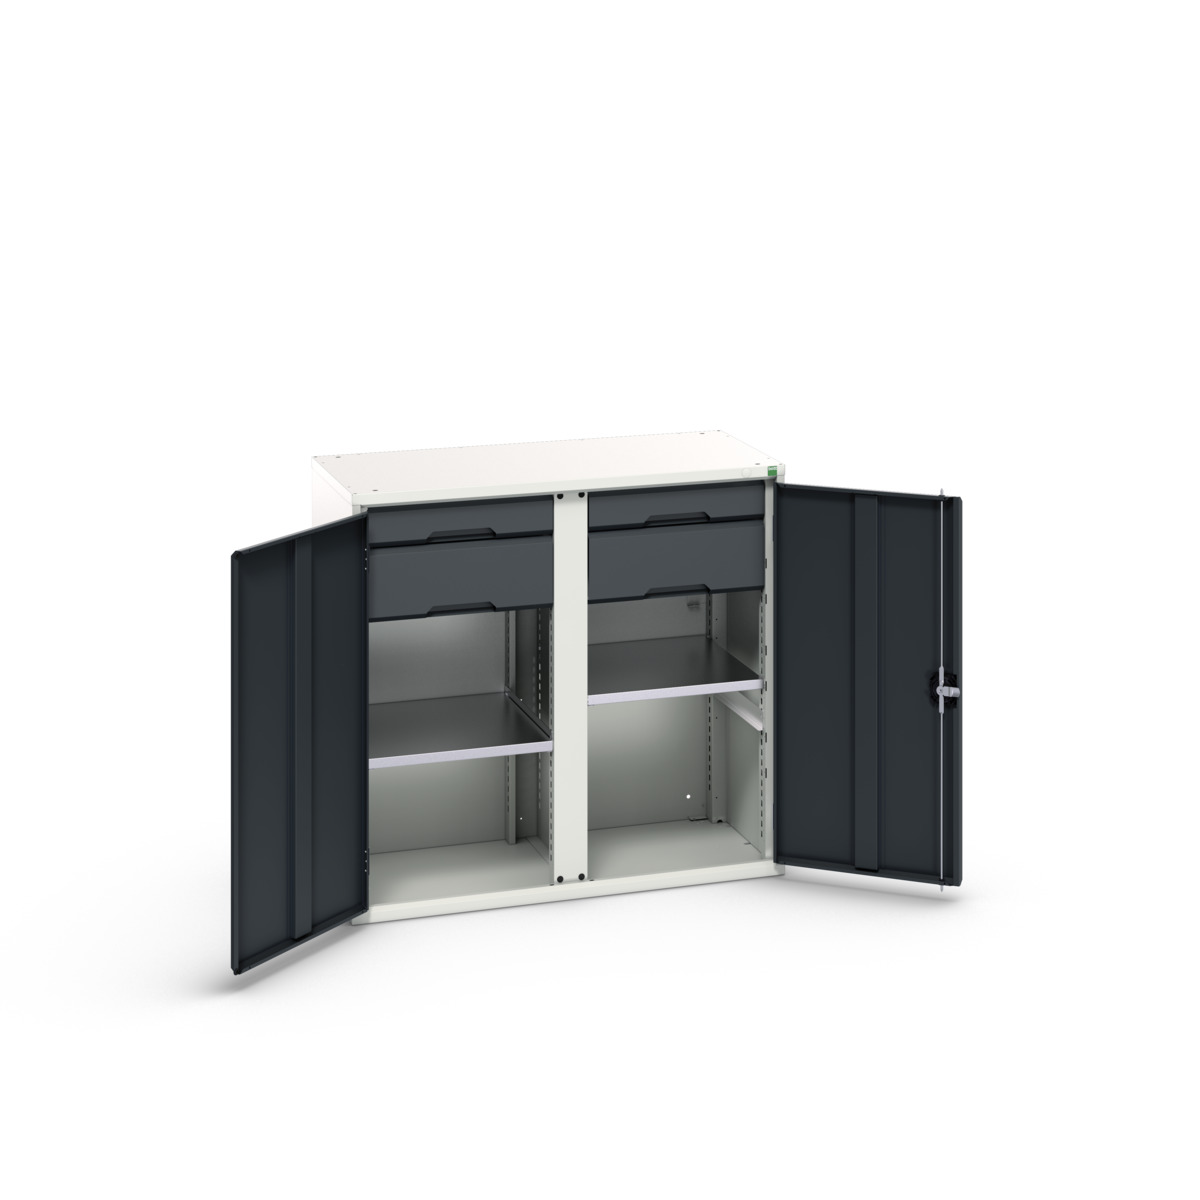 16926556.19 - verso kitted cupboard